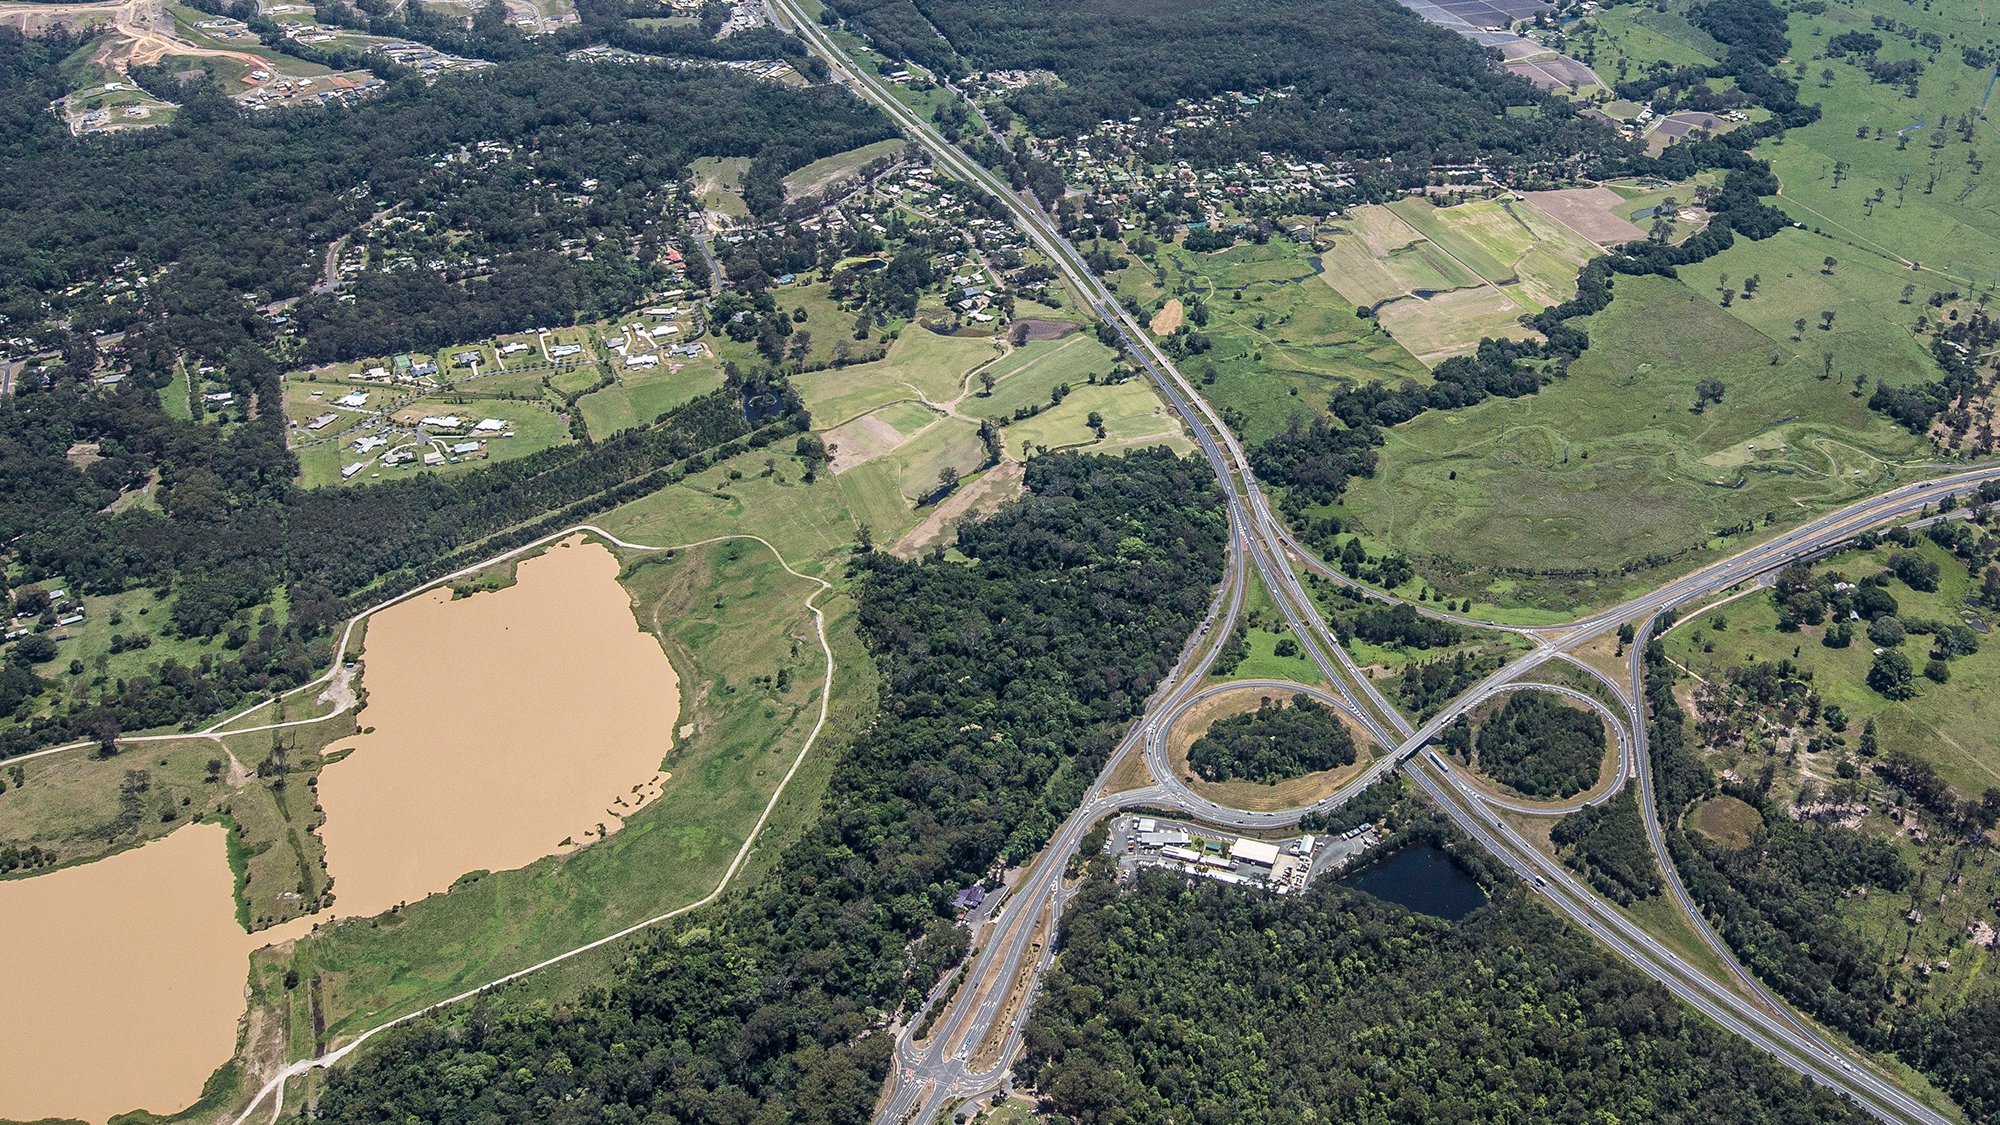 Aerial view of the Caloundra Road interchange being upgraded as part of the Bruce Highway Upgrade Caloundra Road to Sunshine Motorway project